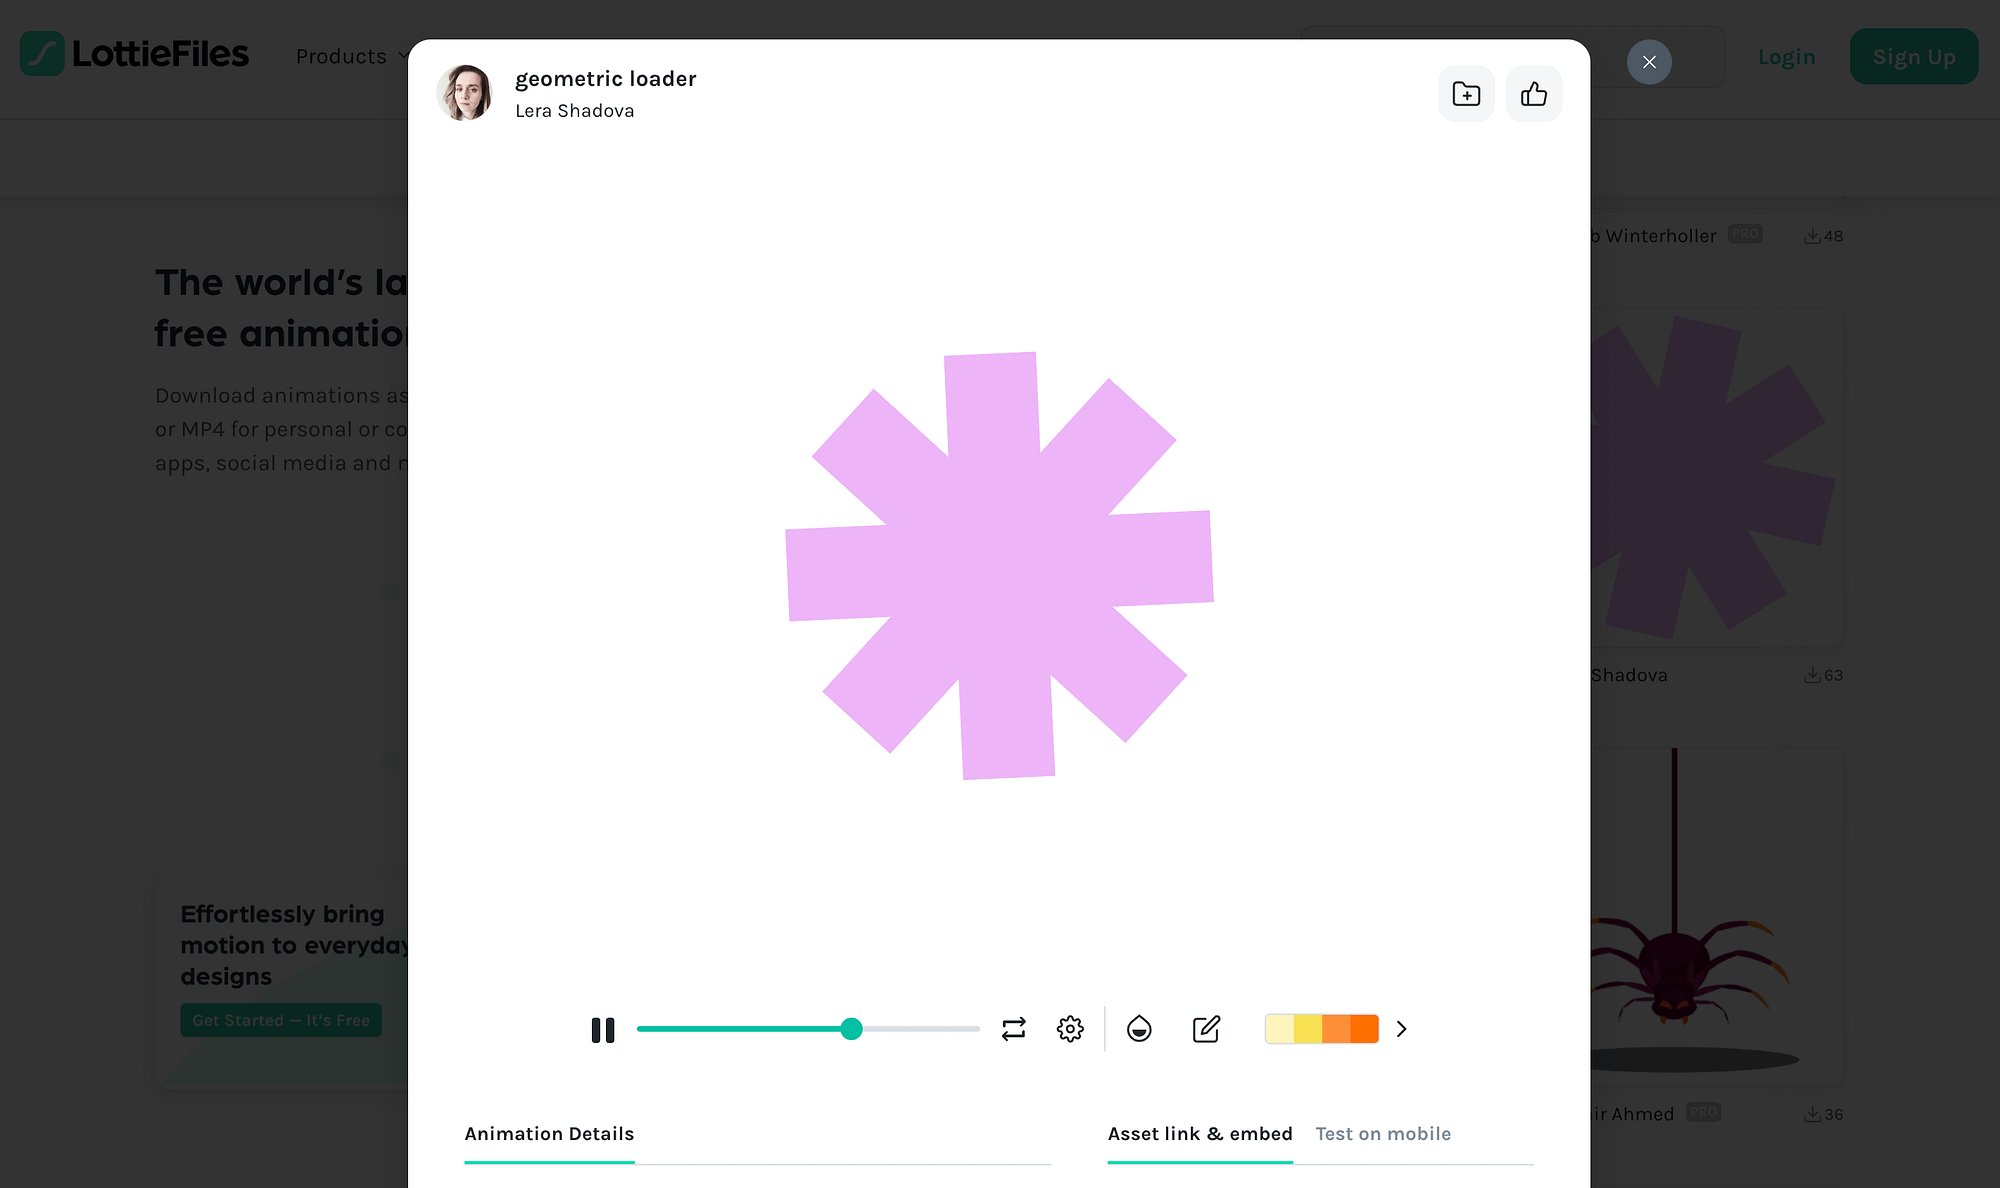 An example animation from the Lottie website.